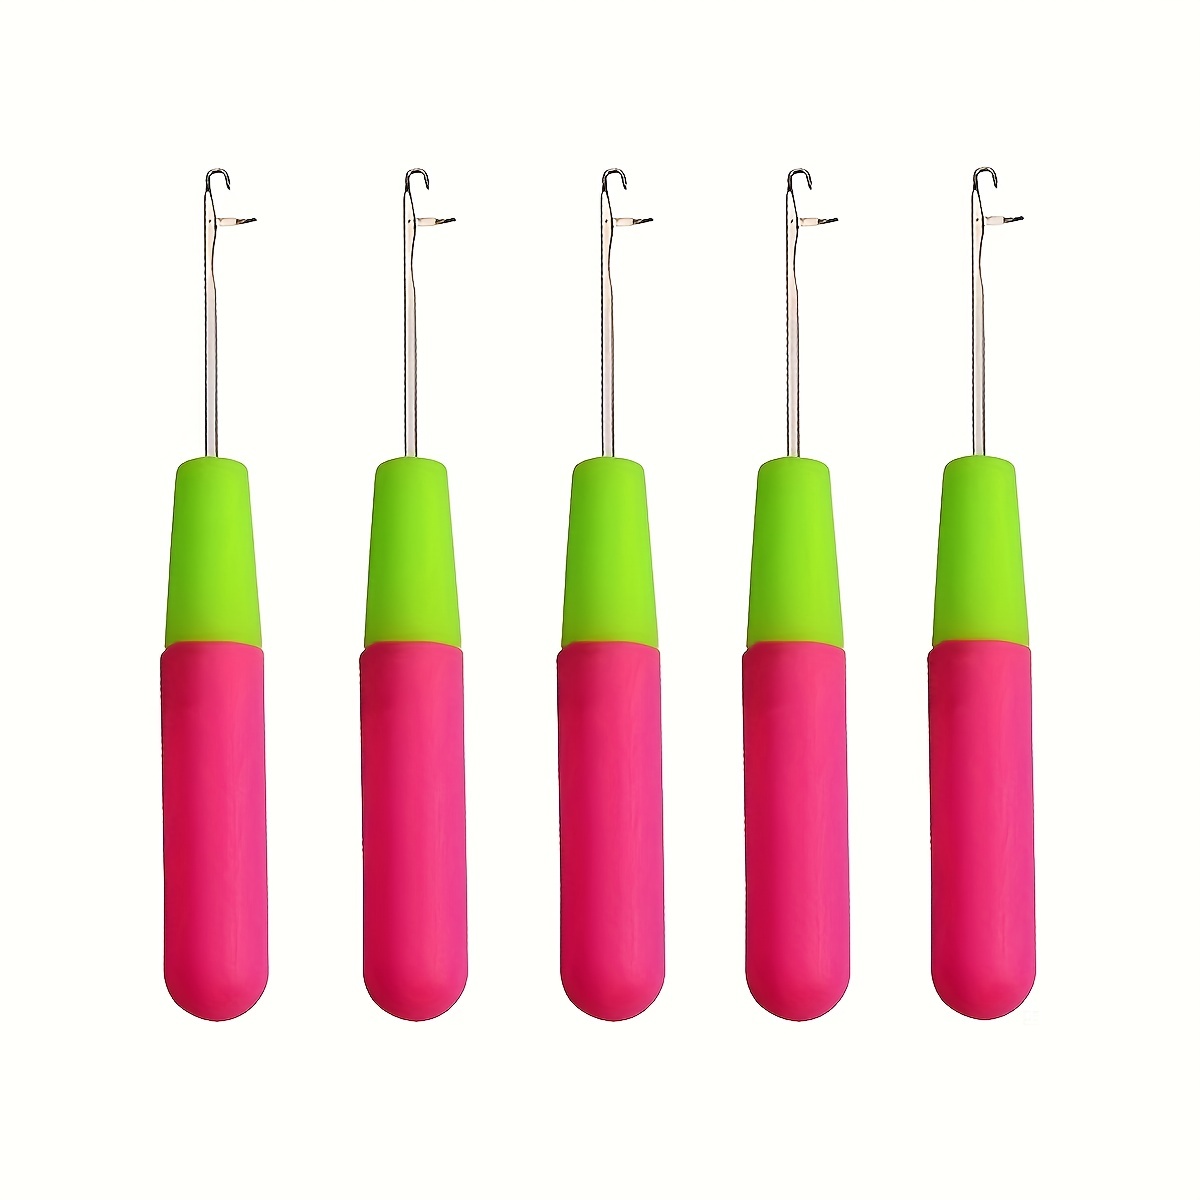 3kinds Leather Craft Crochet Needle Latch Hook Weave Hair Extension Tool Set